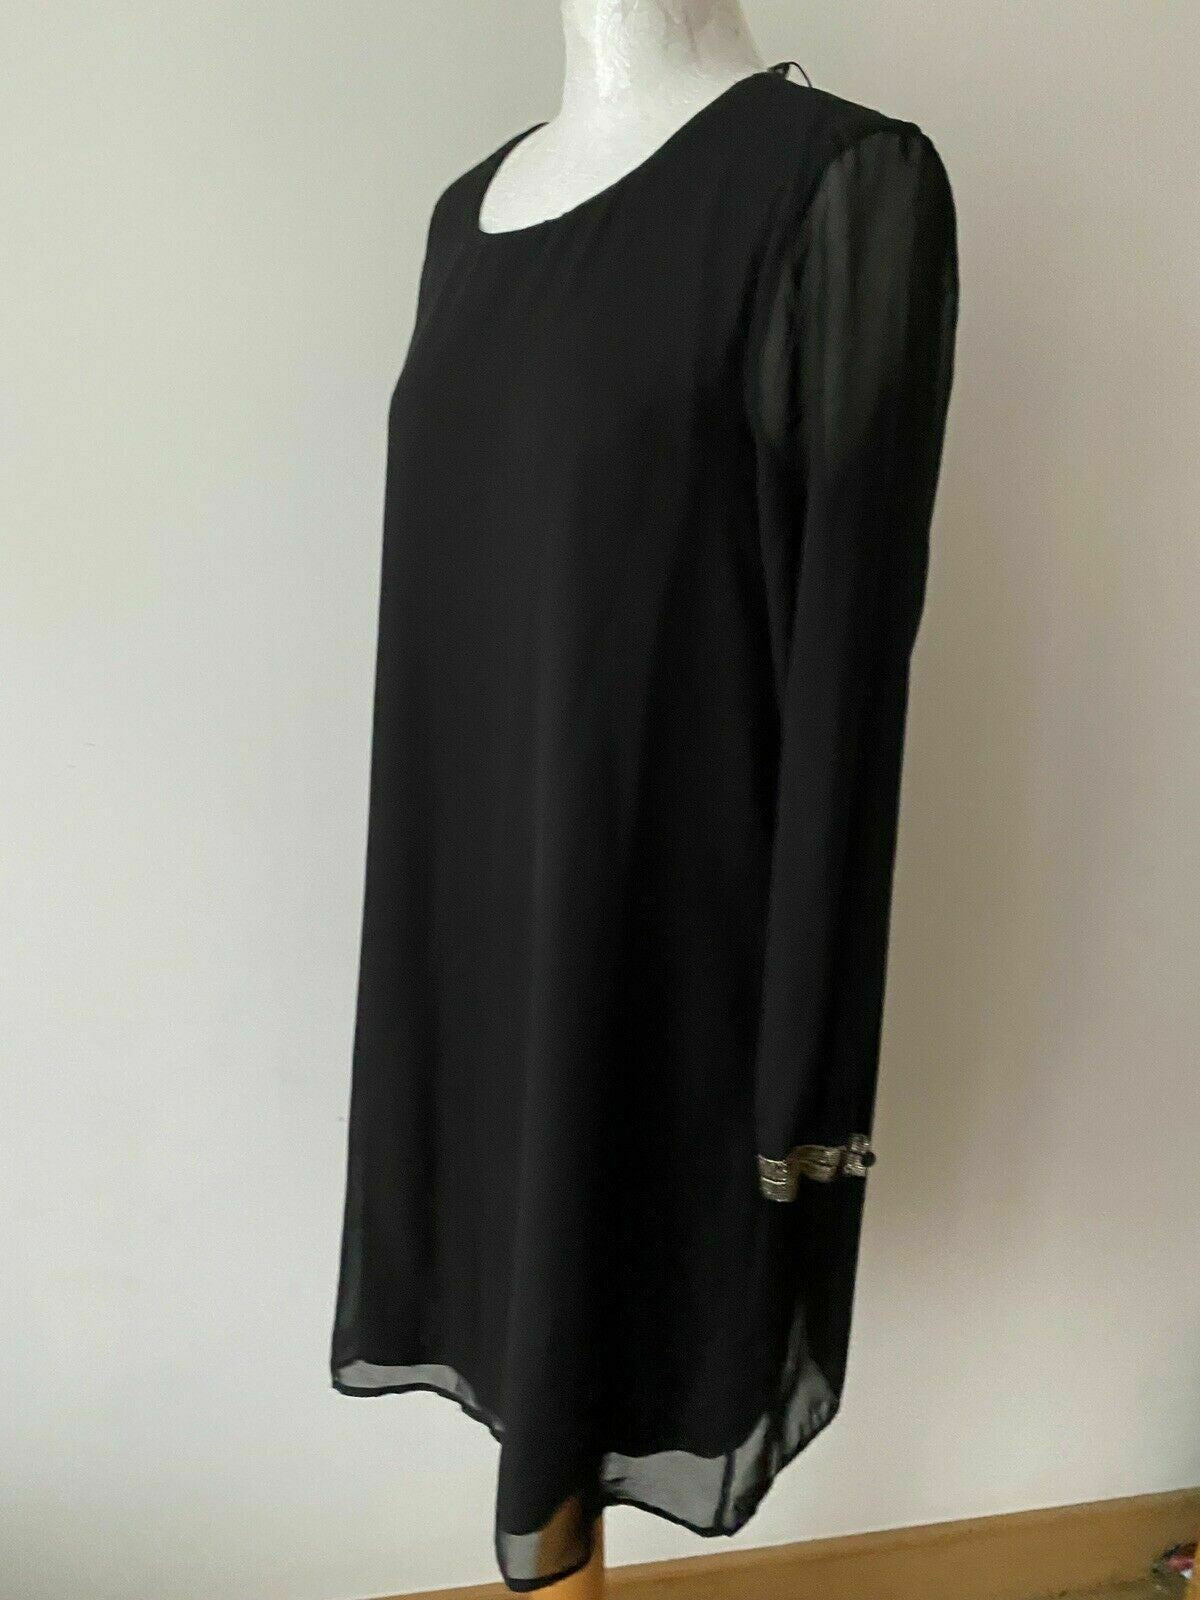 ONLY Sharon Long Sleeve Black Dress Size 10 embellished gold cuffs